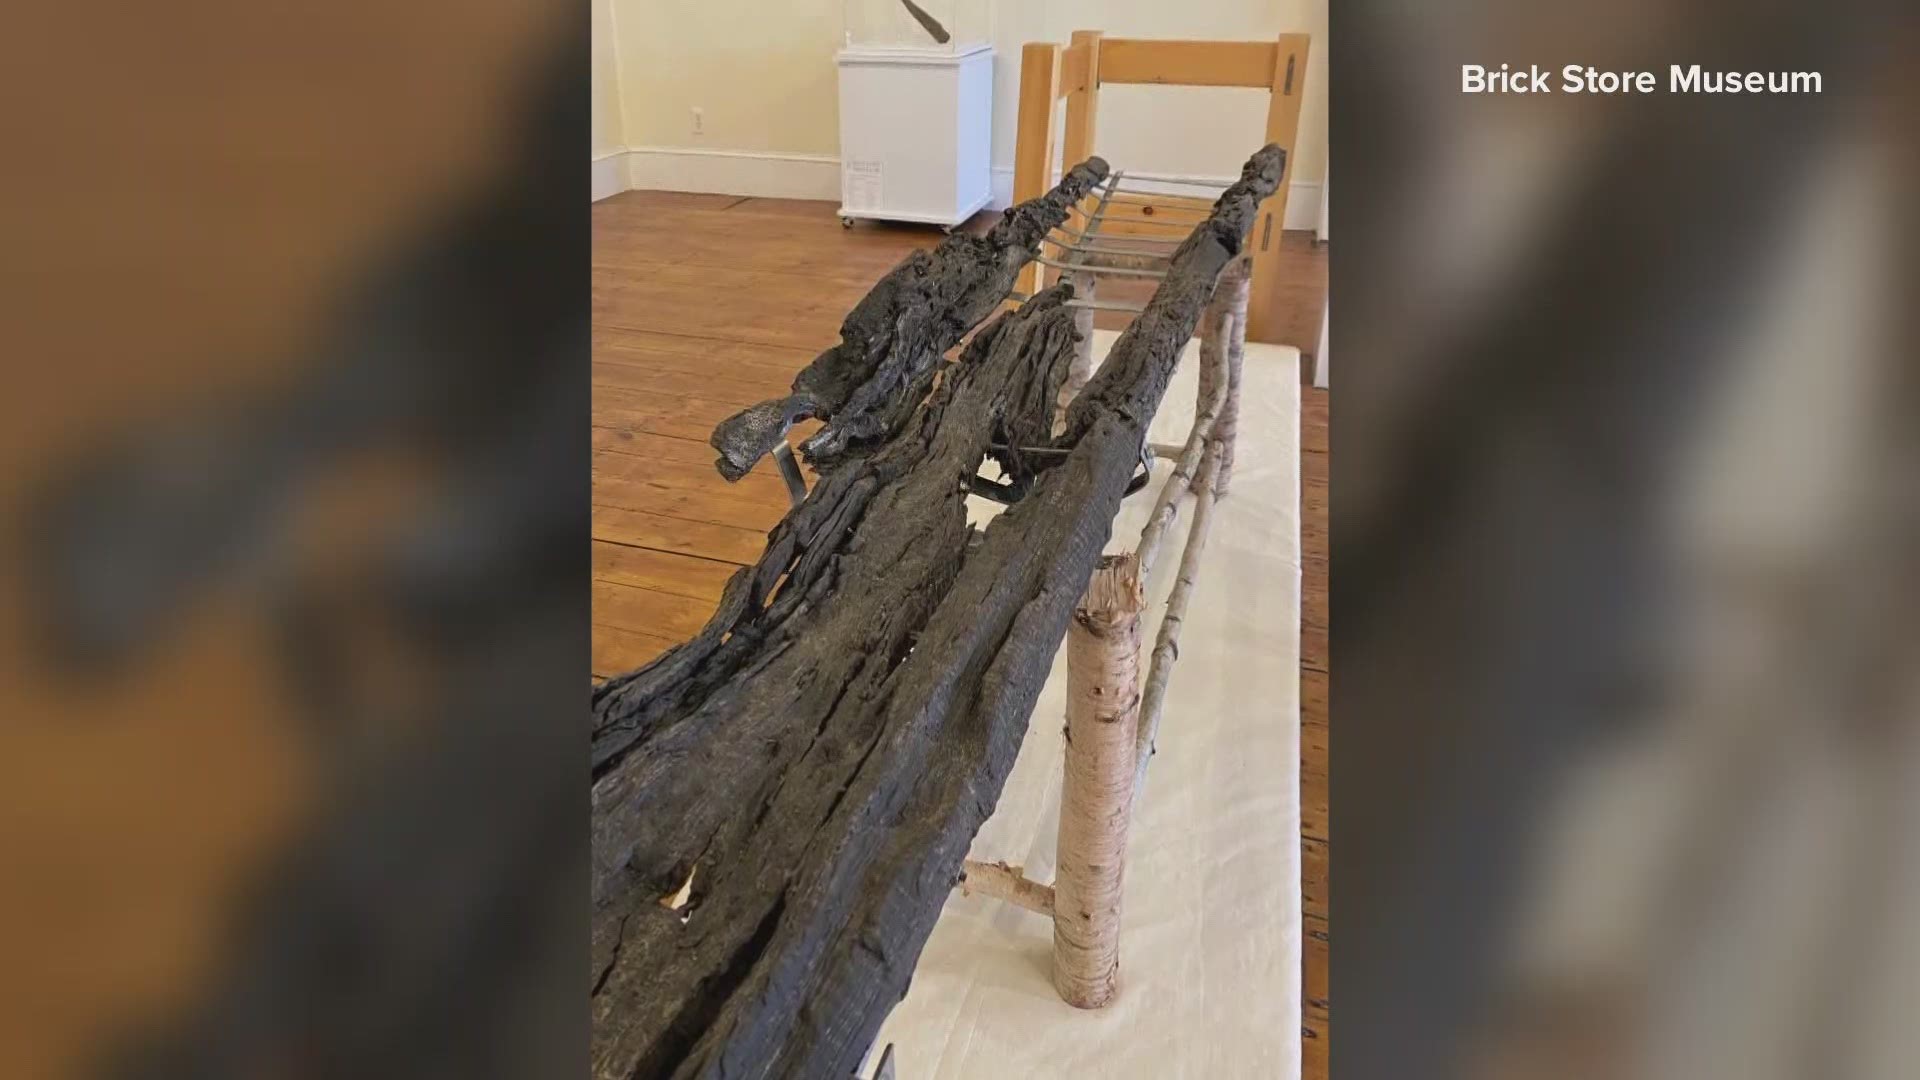 This is the oldest dugout canoe ever found in this area of the Wabanaki homeland, and historians say this sheds more light on Maine history before European contact.